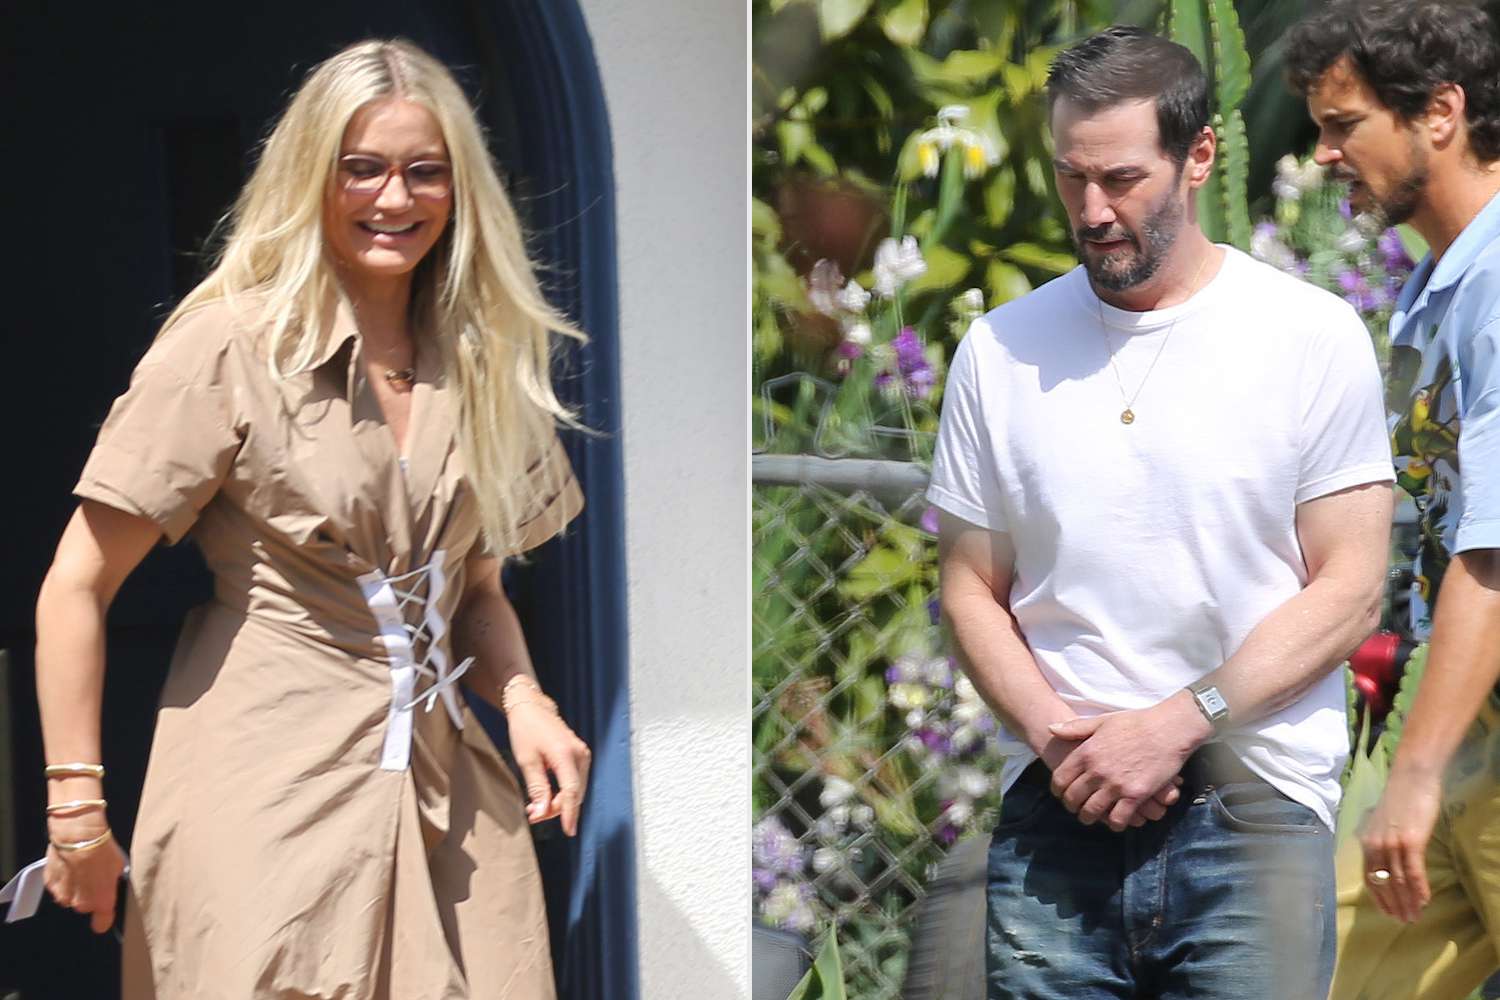 Cameron Diaz and Keanu Reeves Spotted on the Set of Their New Comedy Movie Outcome in L.A.